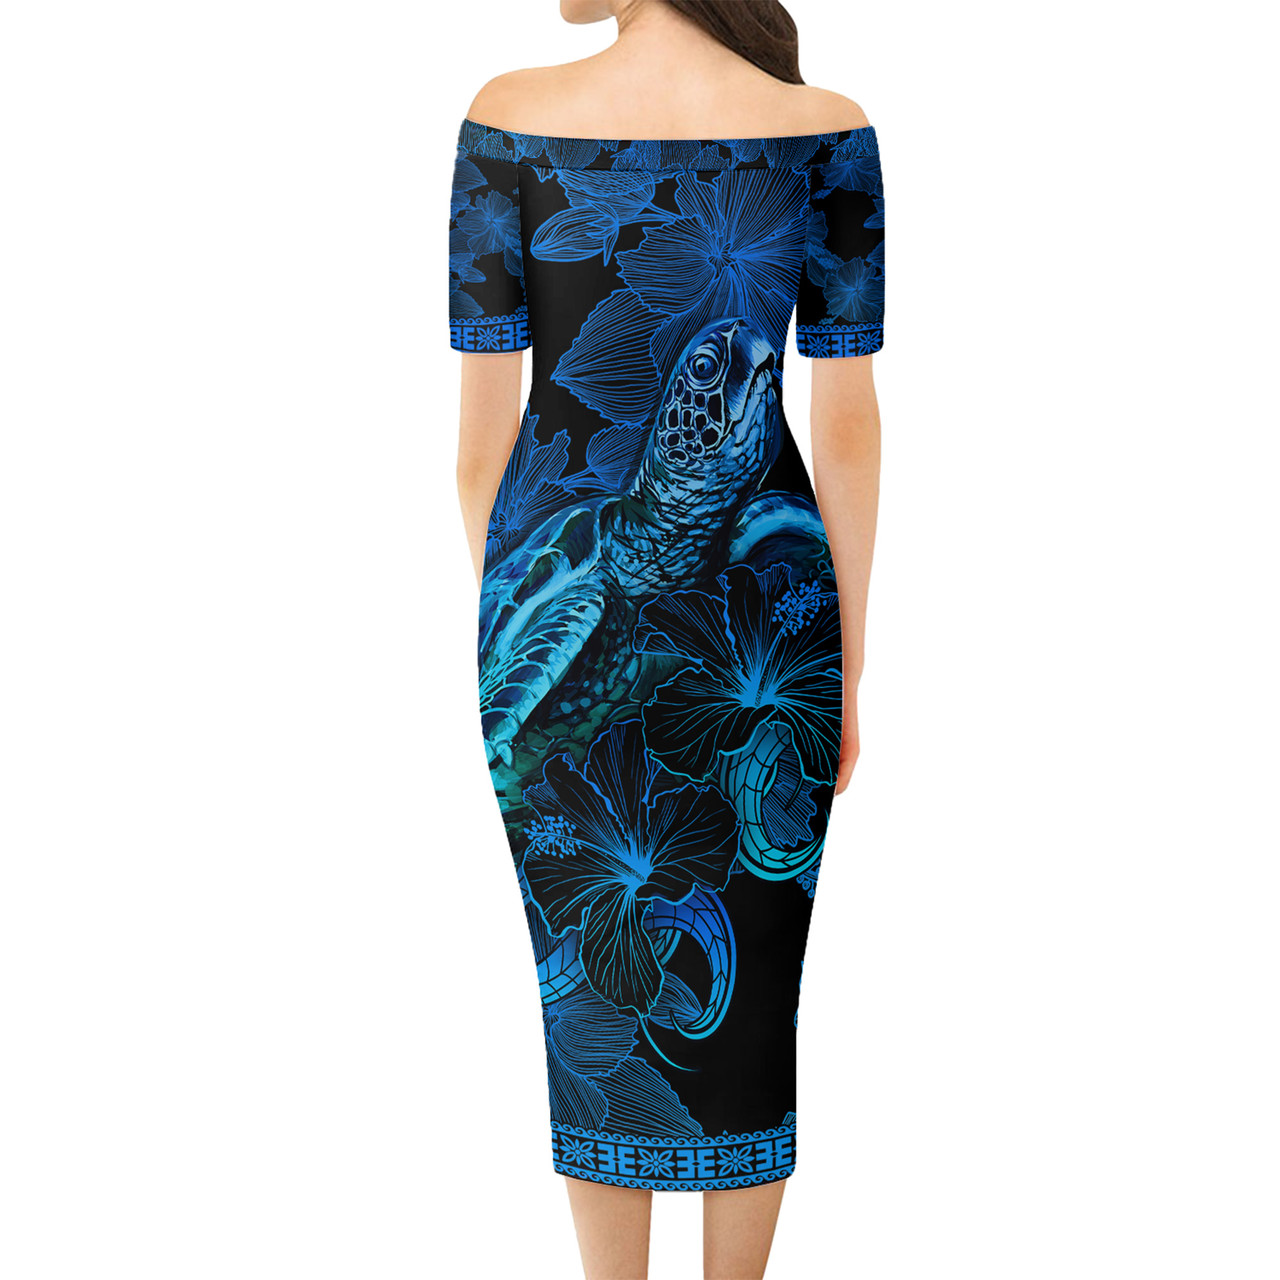 New Caledonia Short Sleeve Off The Shoulder Lady Dress Sea Turtle With Blooming Hibiscus Flowers Tribal Blue